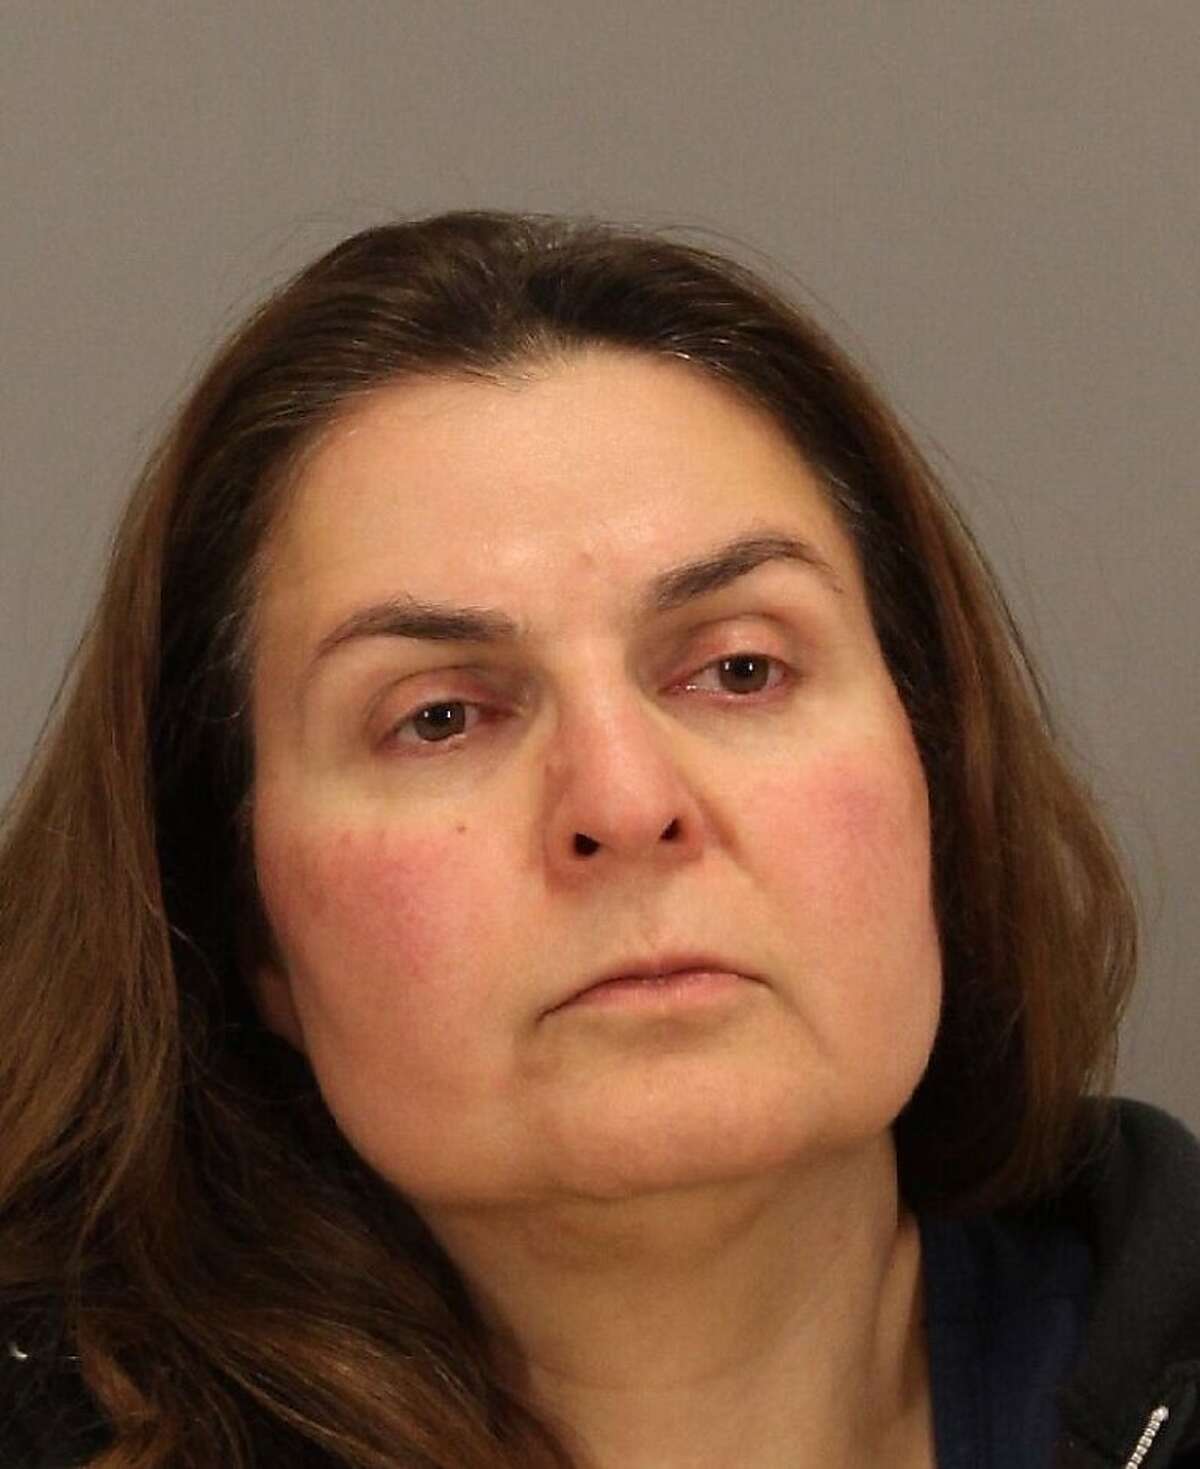 Ramineh Behbehanian, 50, was arrested Monday, April 29, 2013 for allegedly trying to sneak bottles of orange juice tainted with rubbing alcohol into a display case at a Starbucks coffee shop in San Jose, police said.